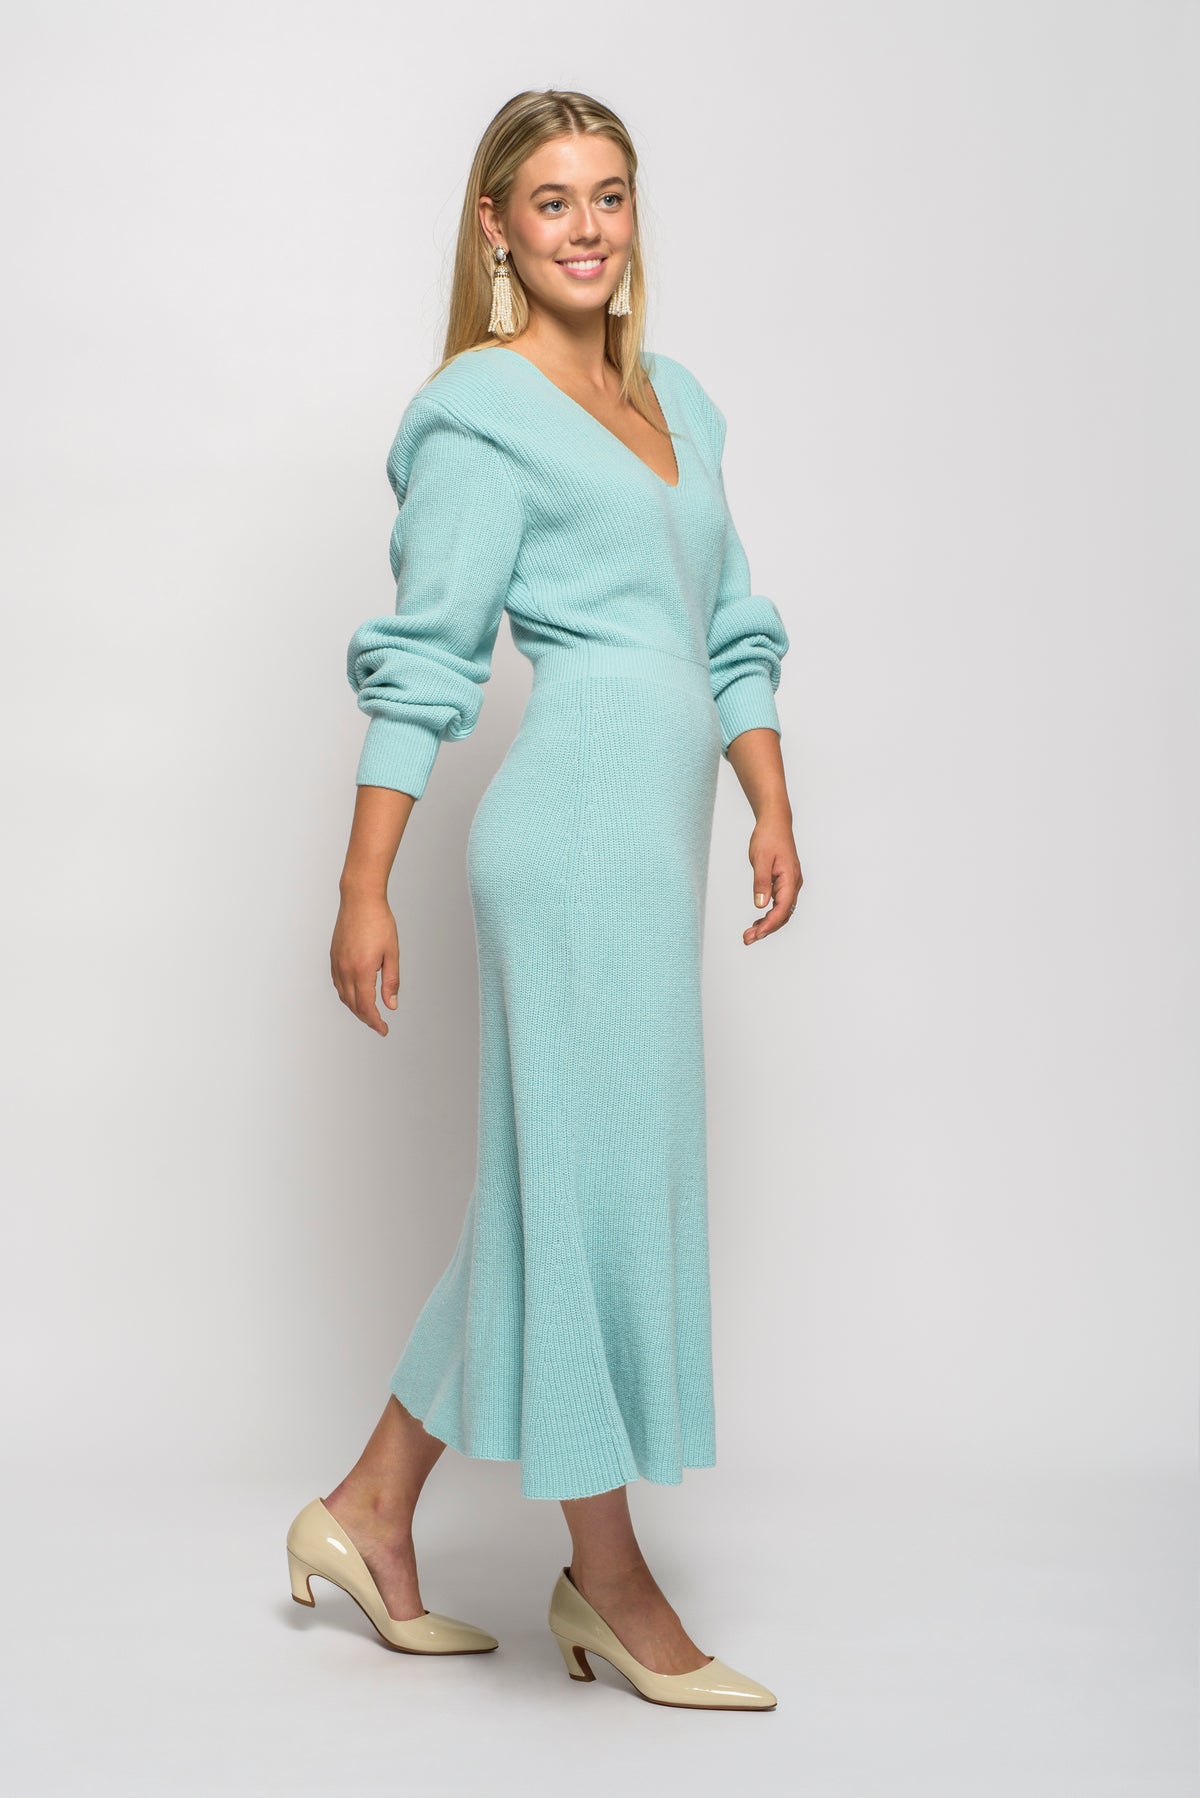 Roland Mouret Cashmere Fitted Dress